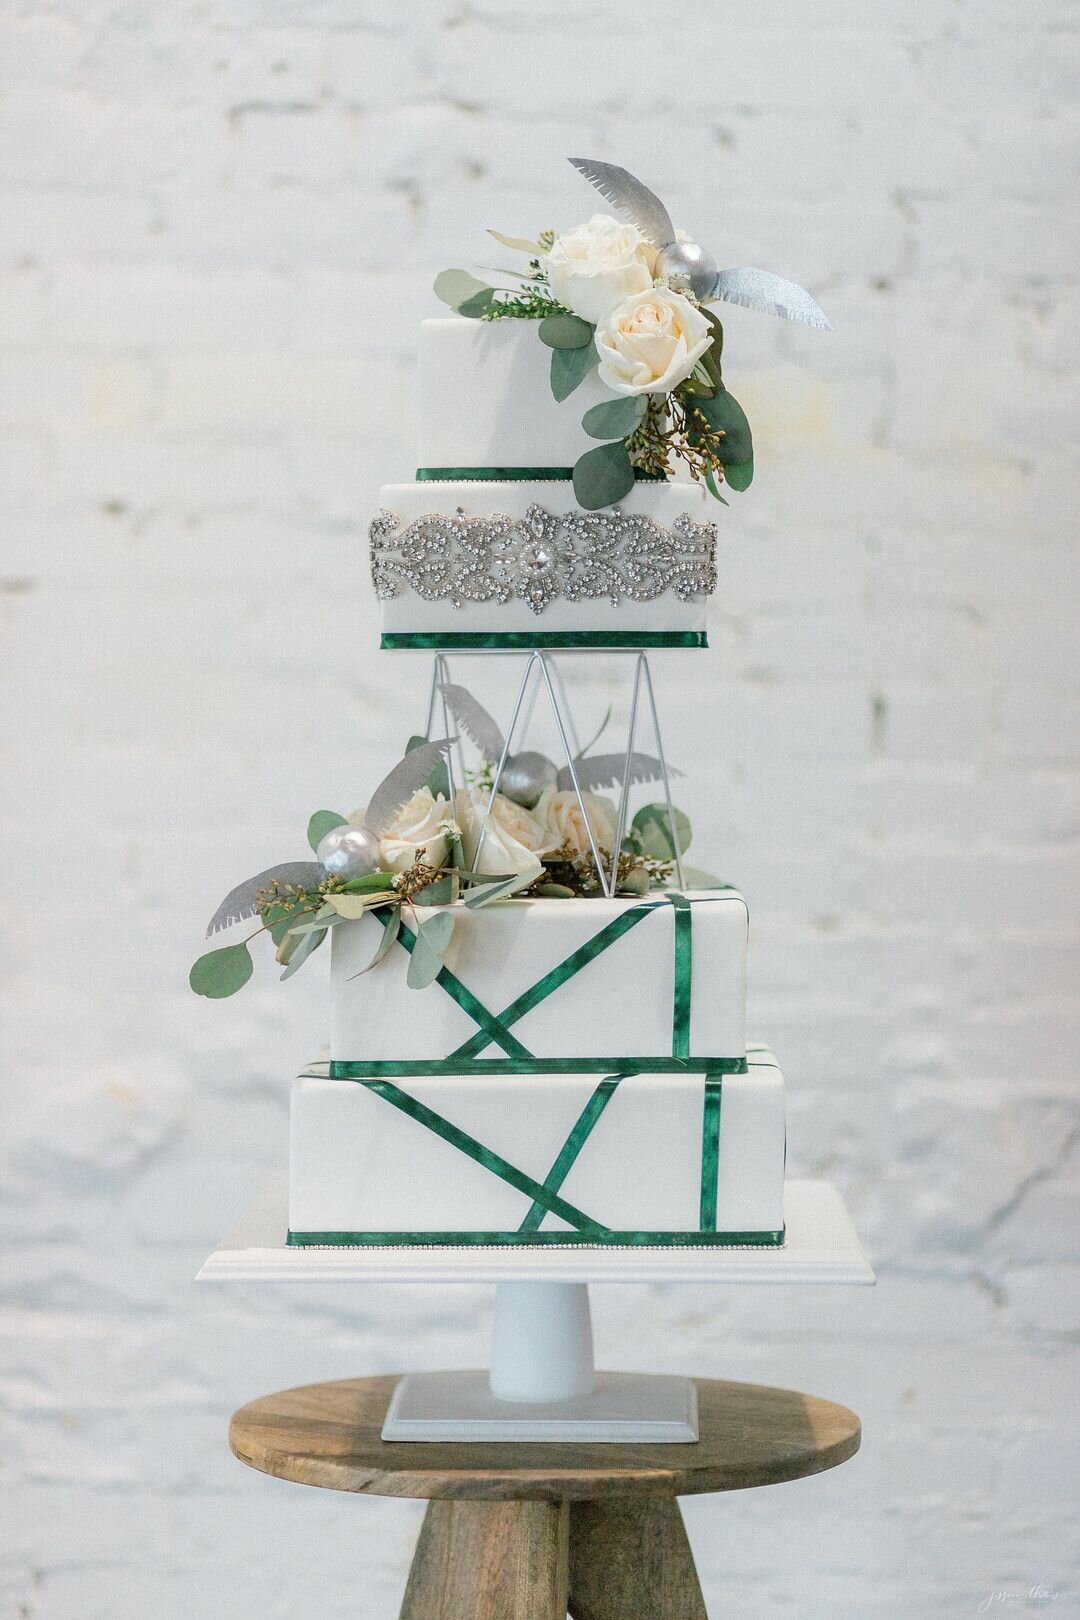 House Slytherin - A Harry Potter Inspired Styled Wedding_Jessica Thomas Photography_Slytherin-93_low.jpg